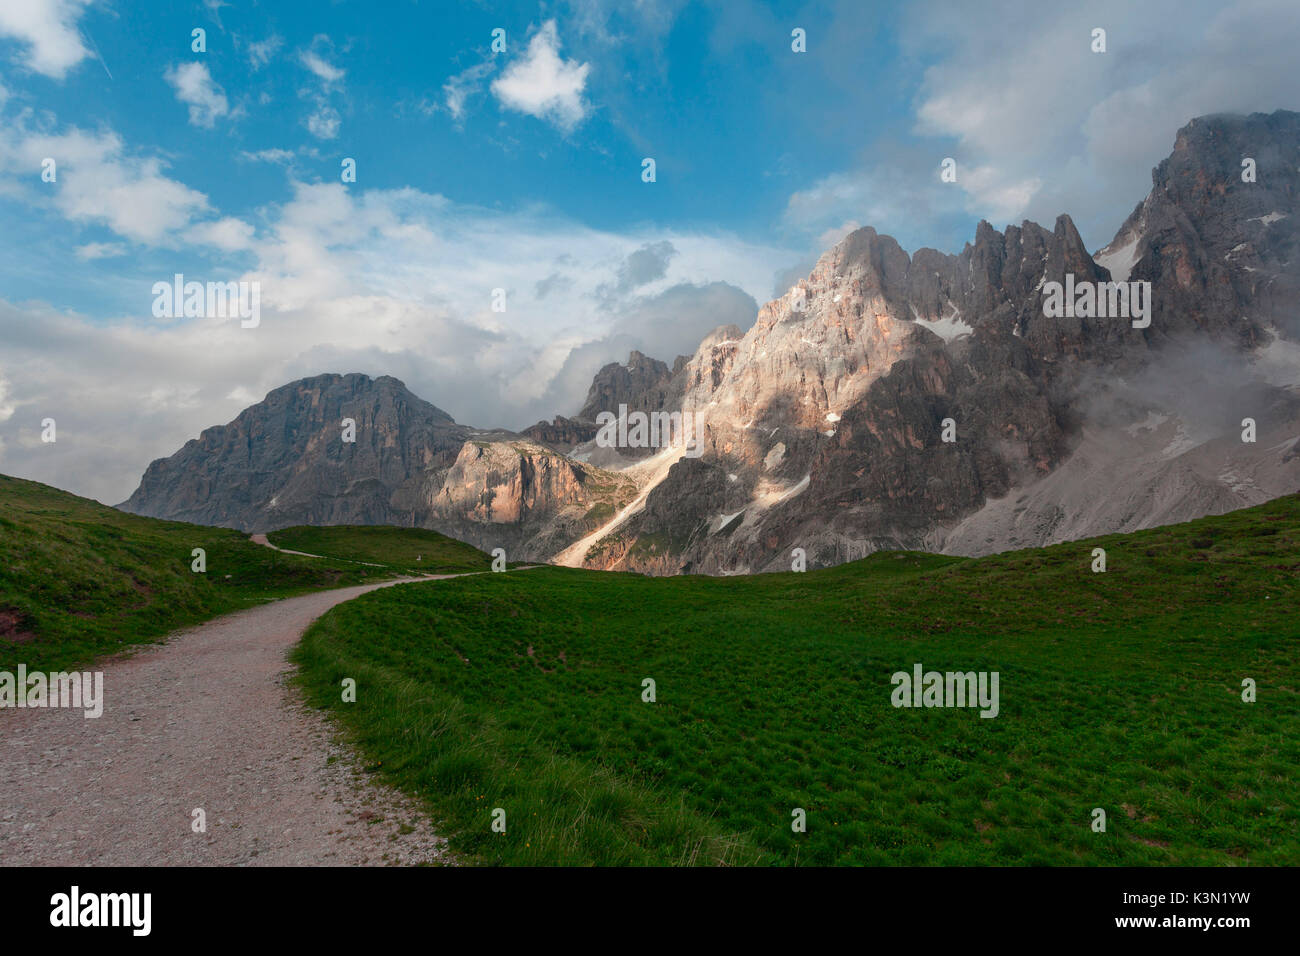 Path through the meadows near the Baita Segantini. In the background the mountain Mulaz and the spiers of the Pale di San Martino. Dolomites, Pala group, Rolle pass. Stock Photo